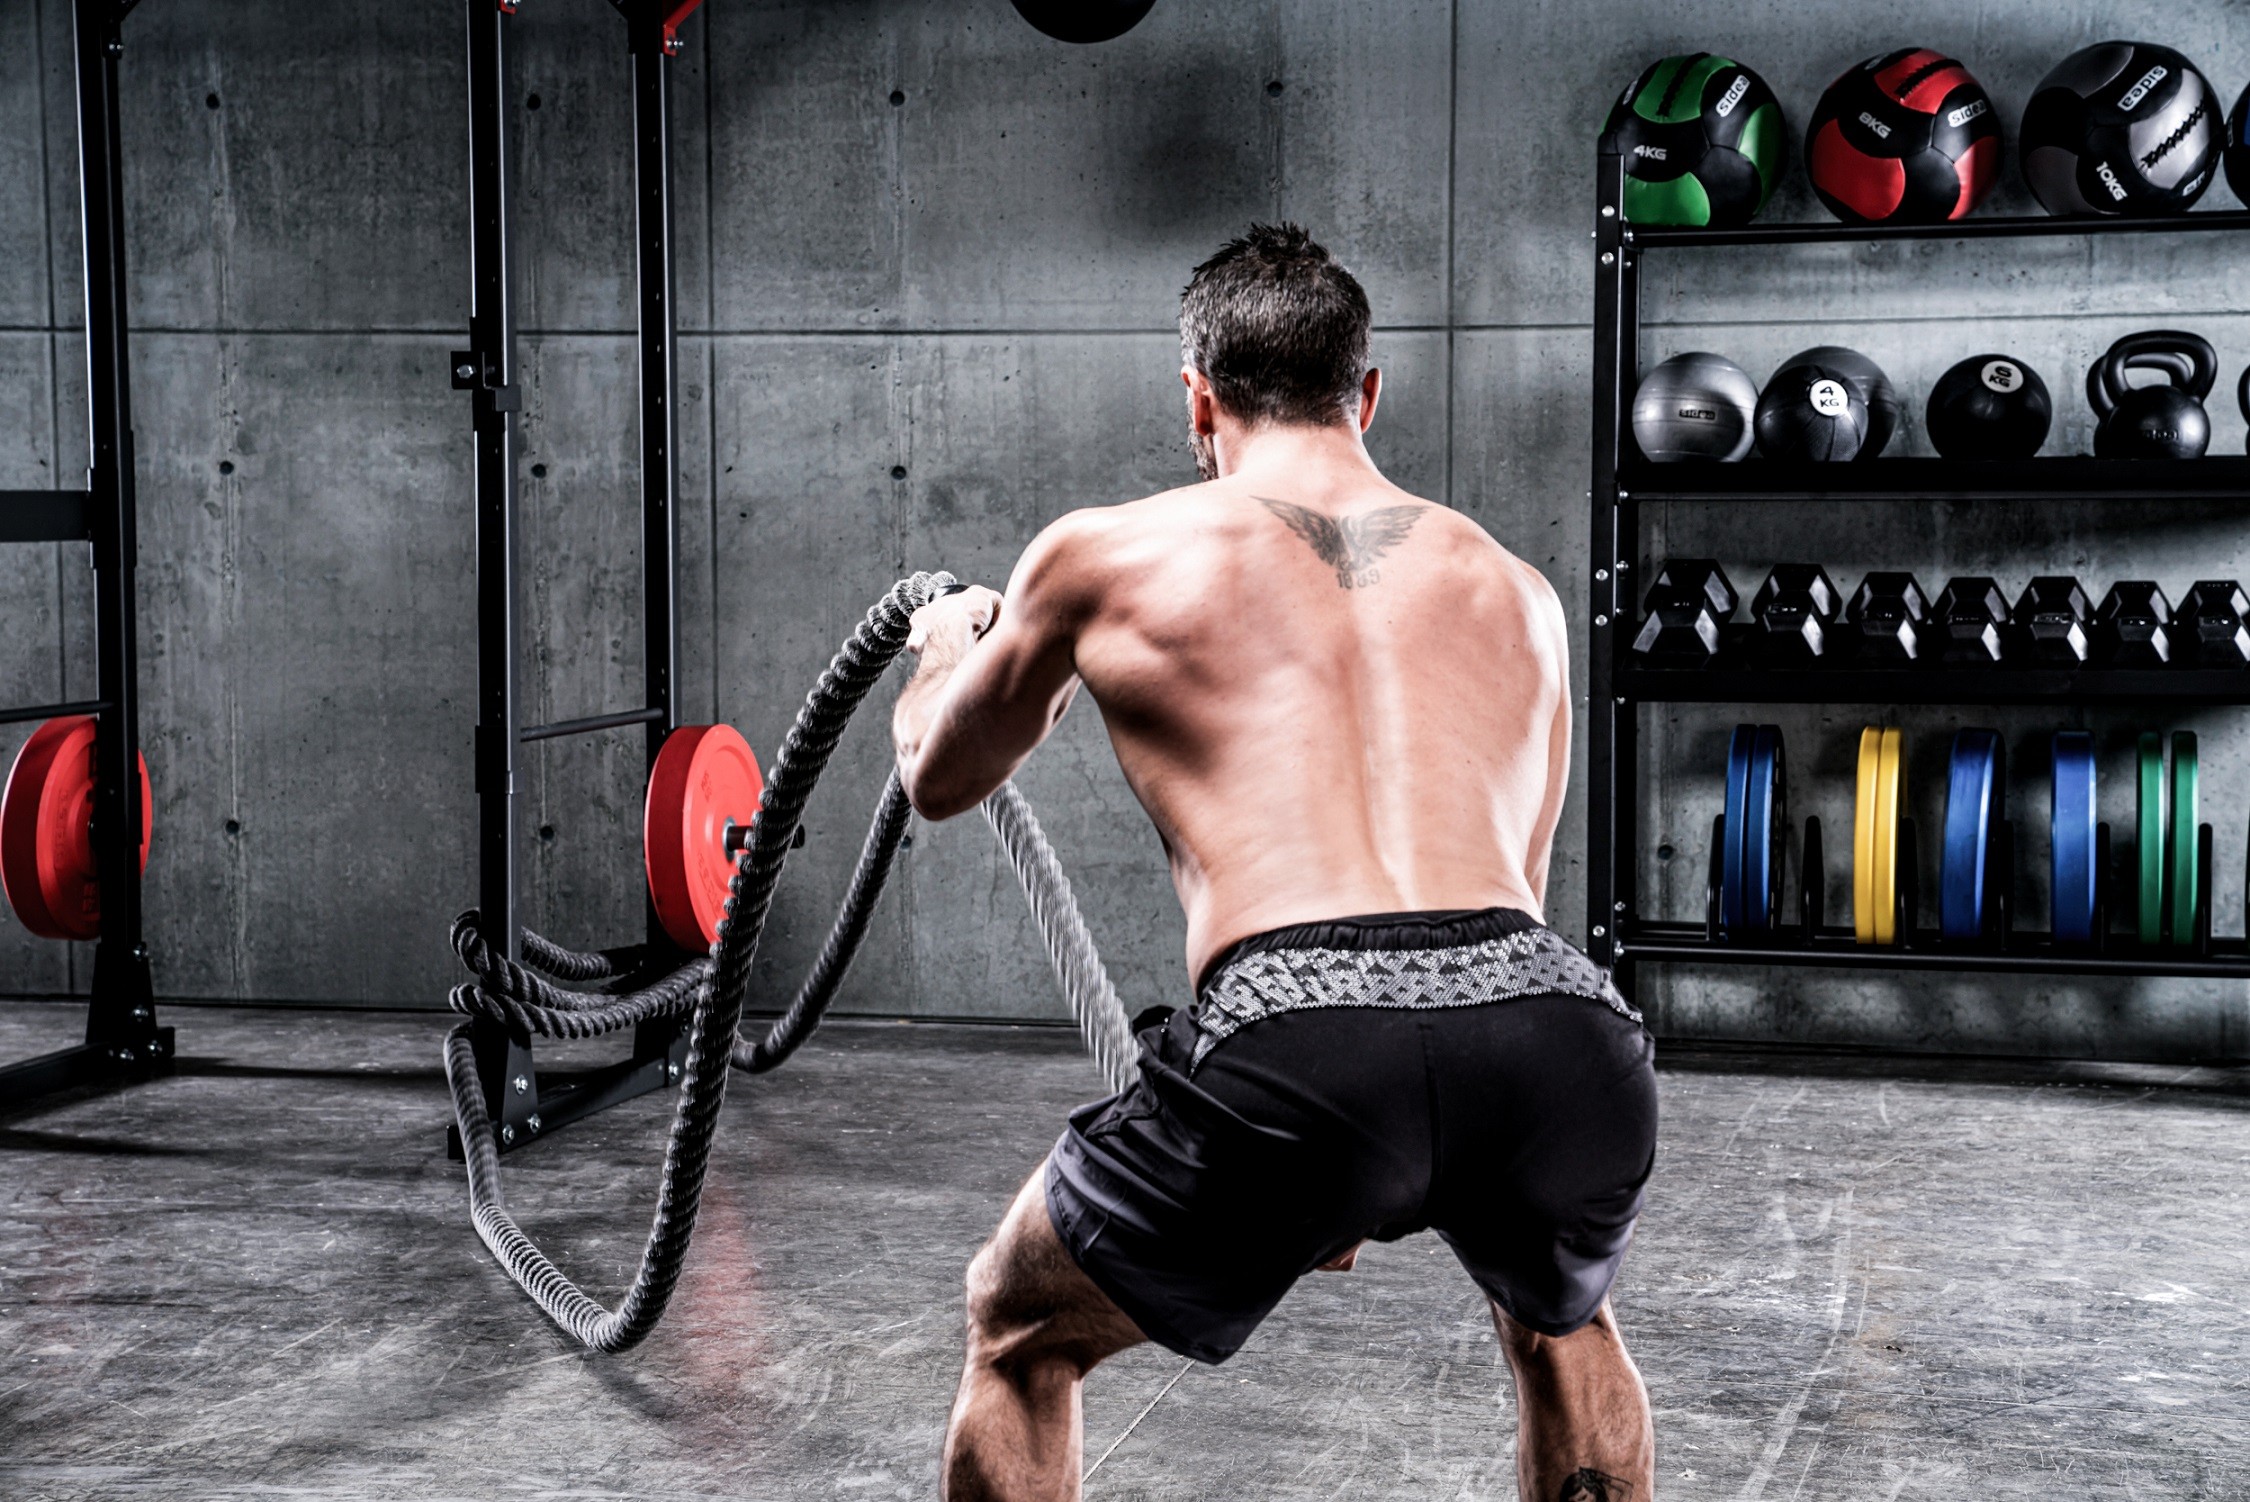 10 Best Battle Rope Exercises For Full Body Workouts Steel, 59% OFF